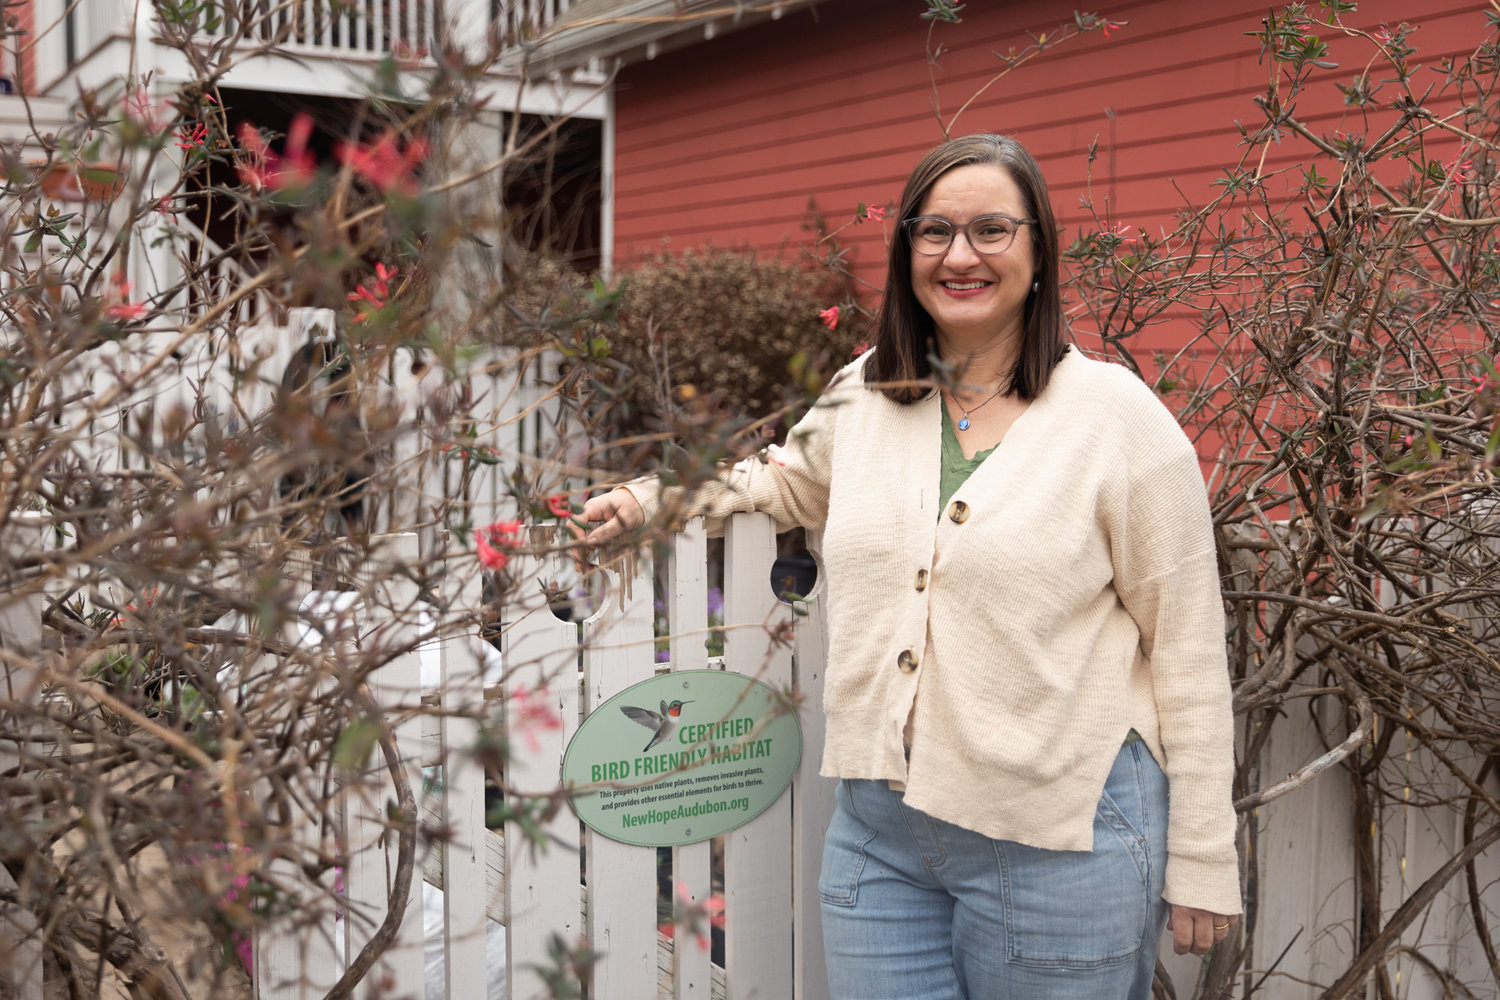 Jerilyn Maclean poses for a portrait in her backyard in Briar Chapel. Maclean is the founder of the Briar Chapel Native Plant Club, a neighborhood group with more than 500 members.